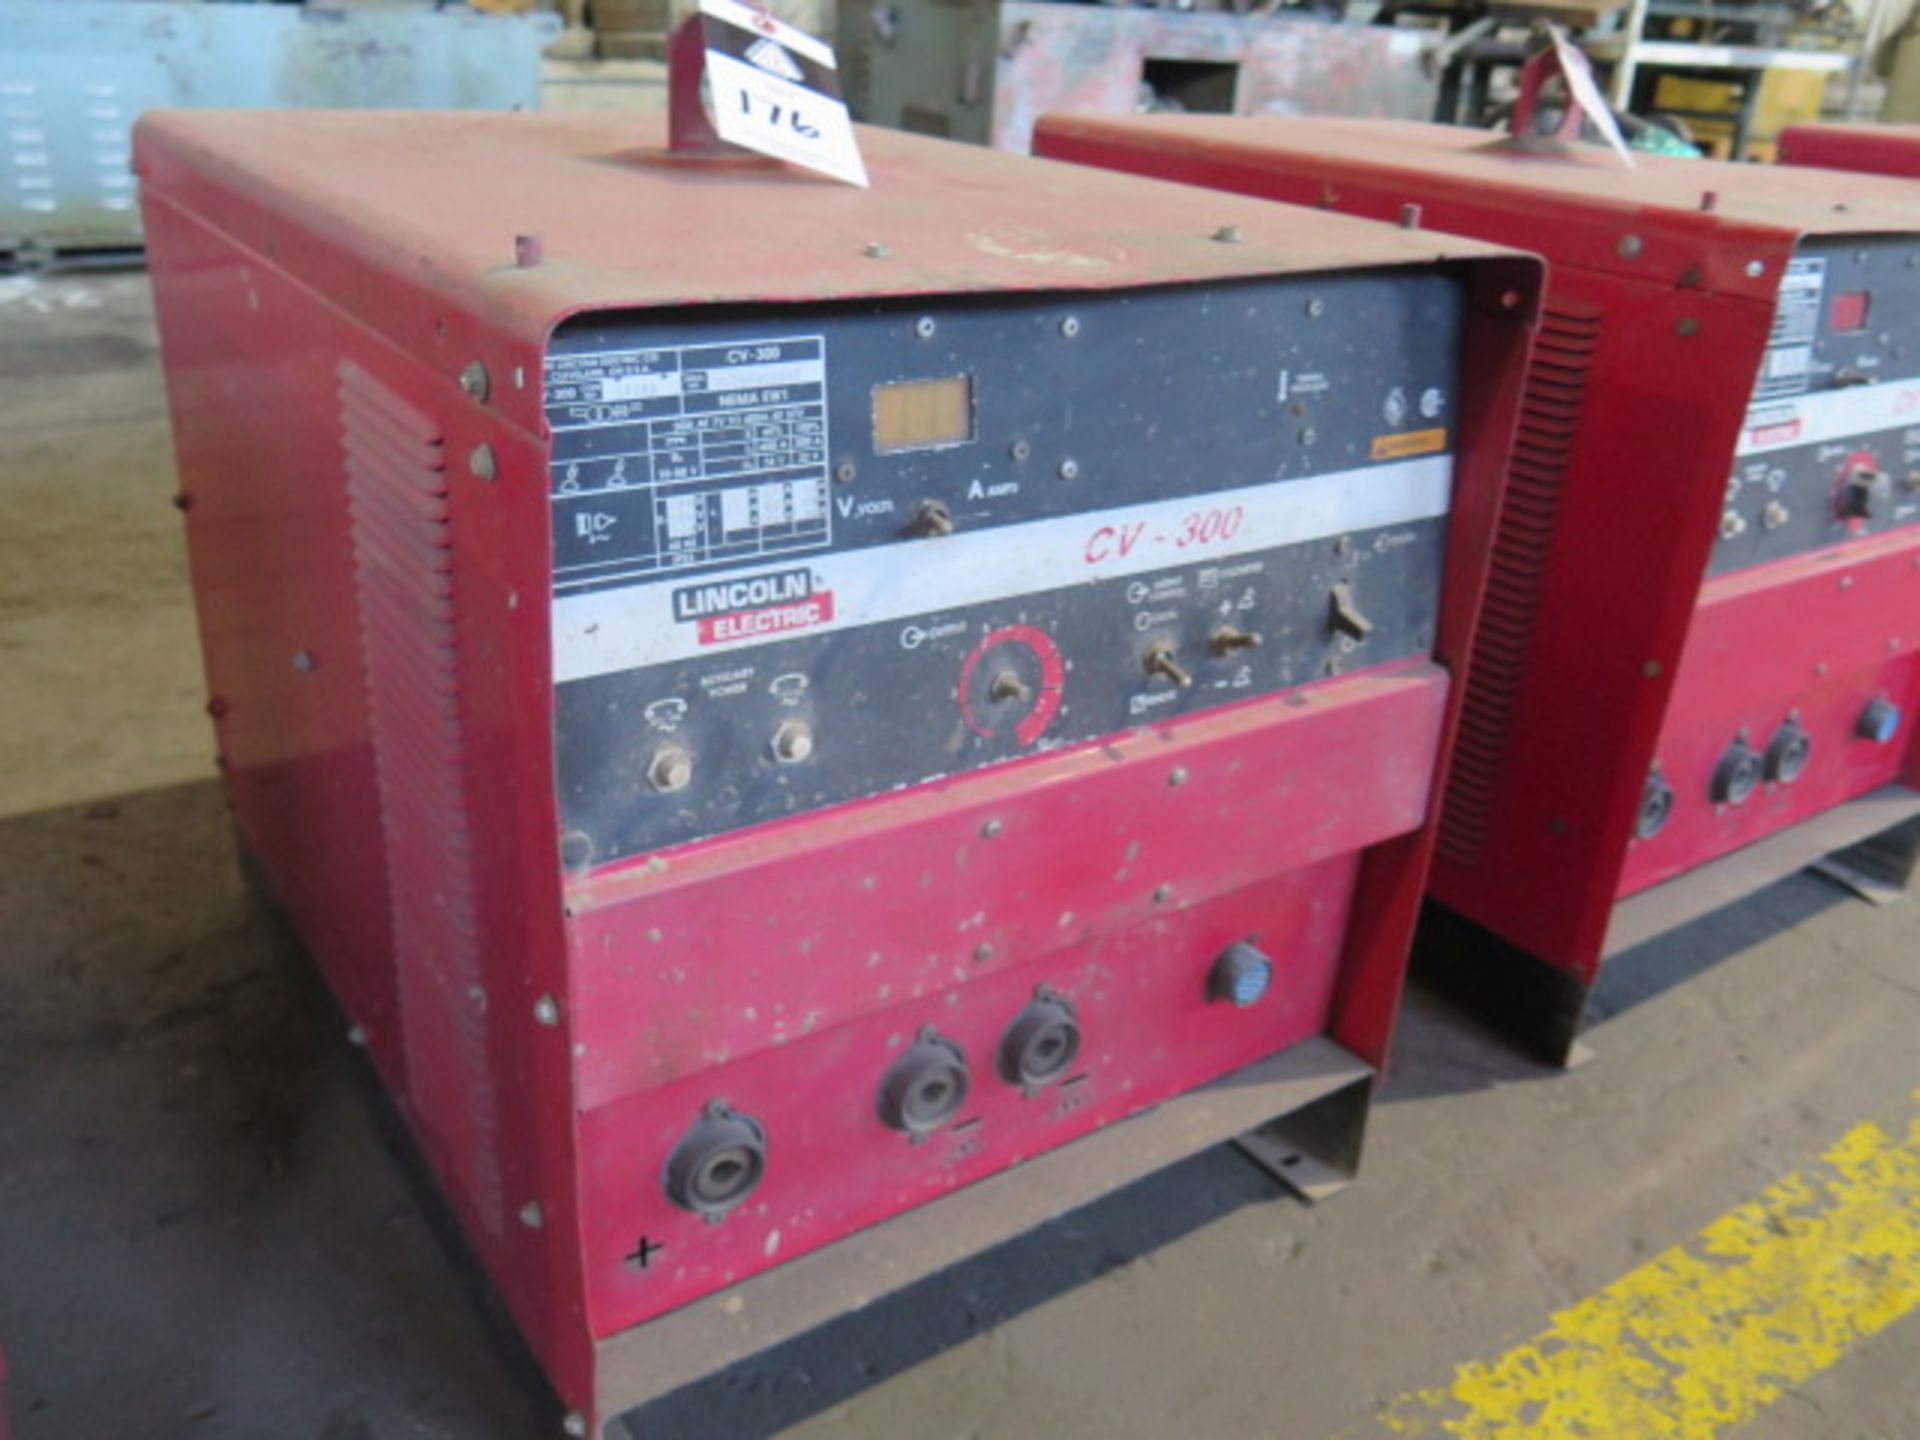 Lincoln CV-305 Arc Welding Power Source (NO CABLES) (SOLD AS-IS - NO WARRANTY) - Image 2 of 5